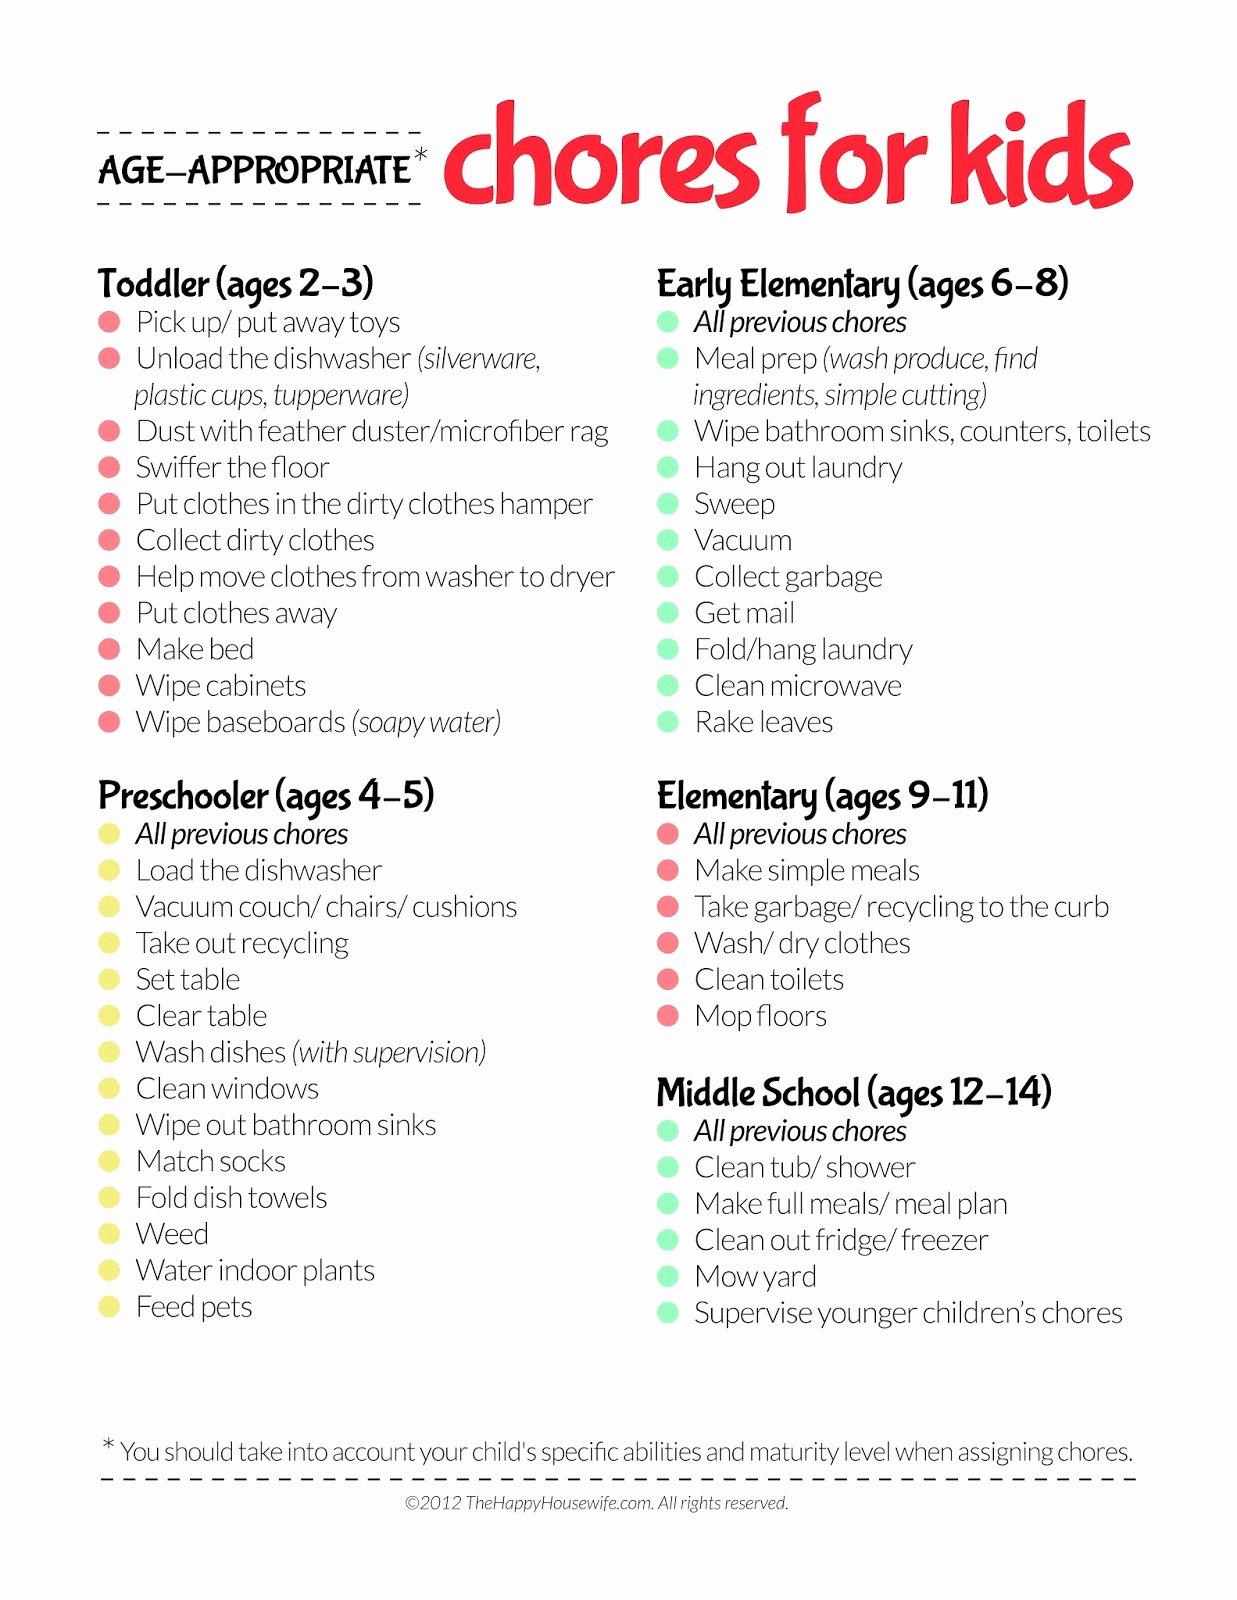 A List Of Chores Inspirational Beauty and the Bump Age Appropriate Chores for Kids